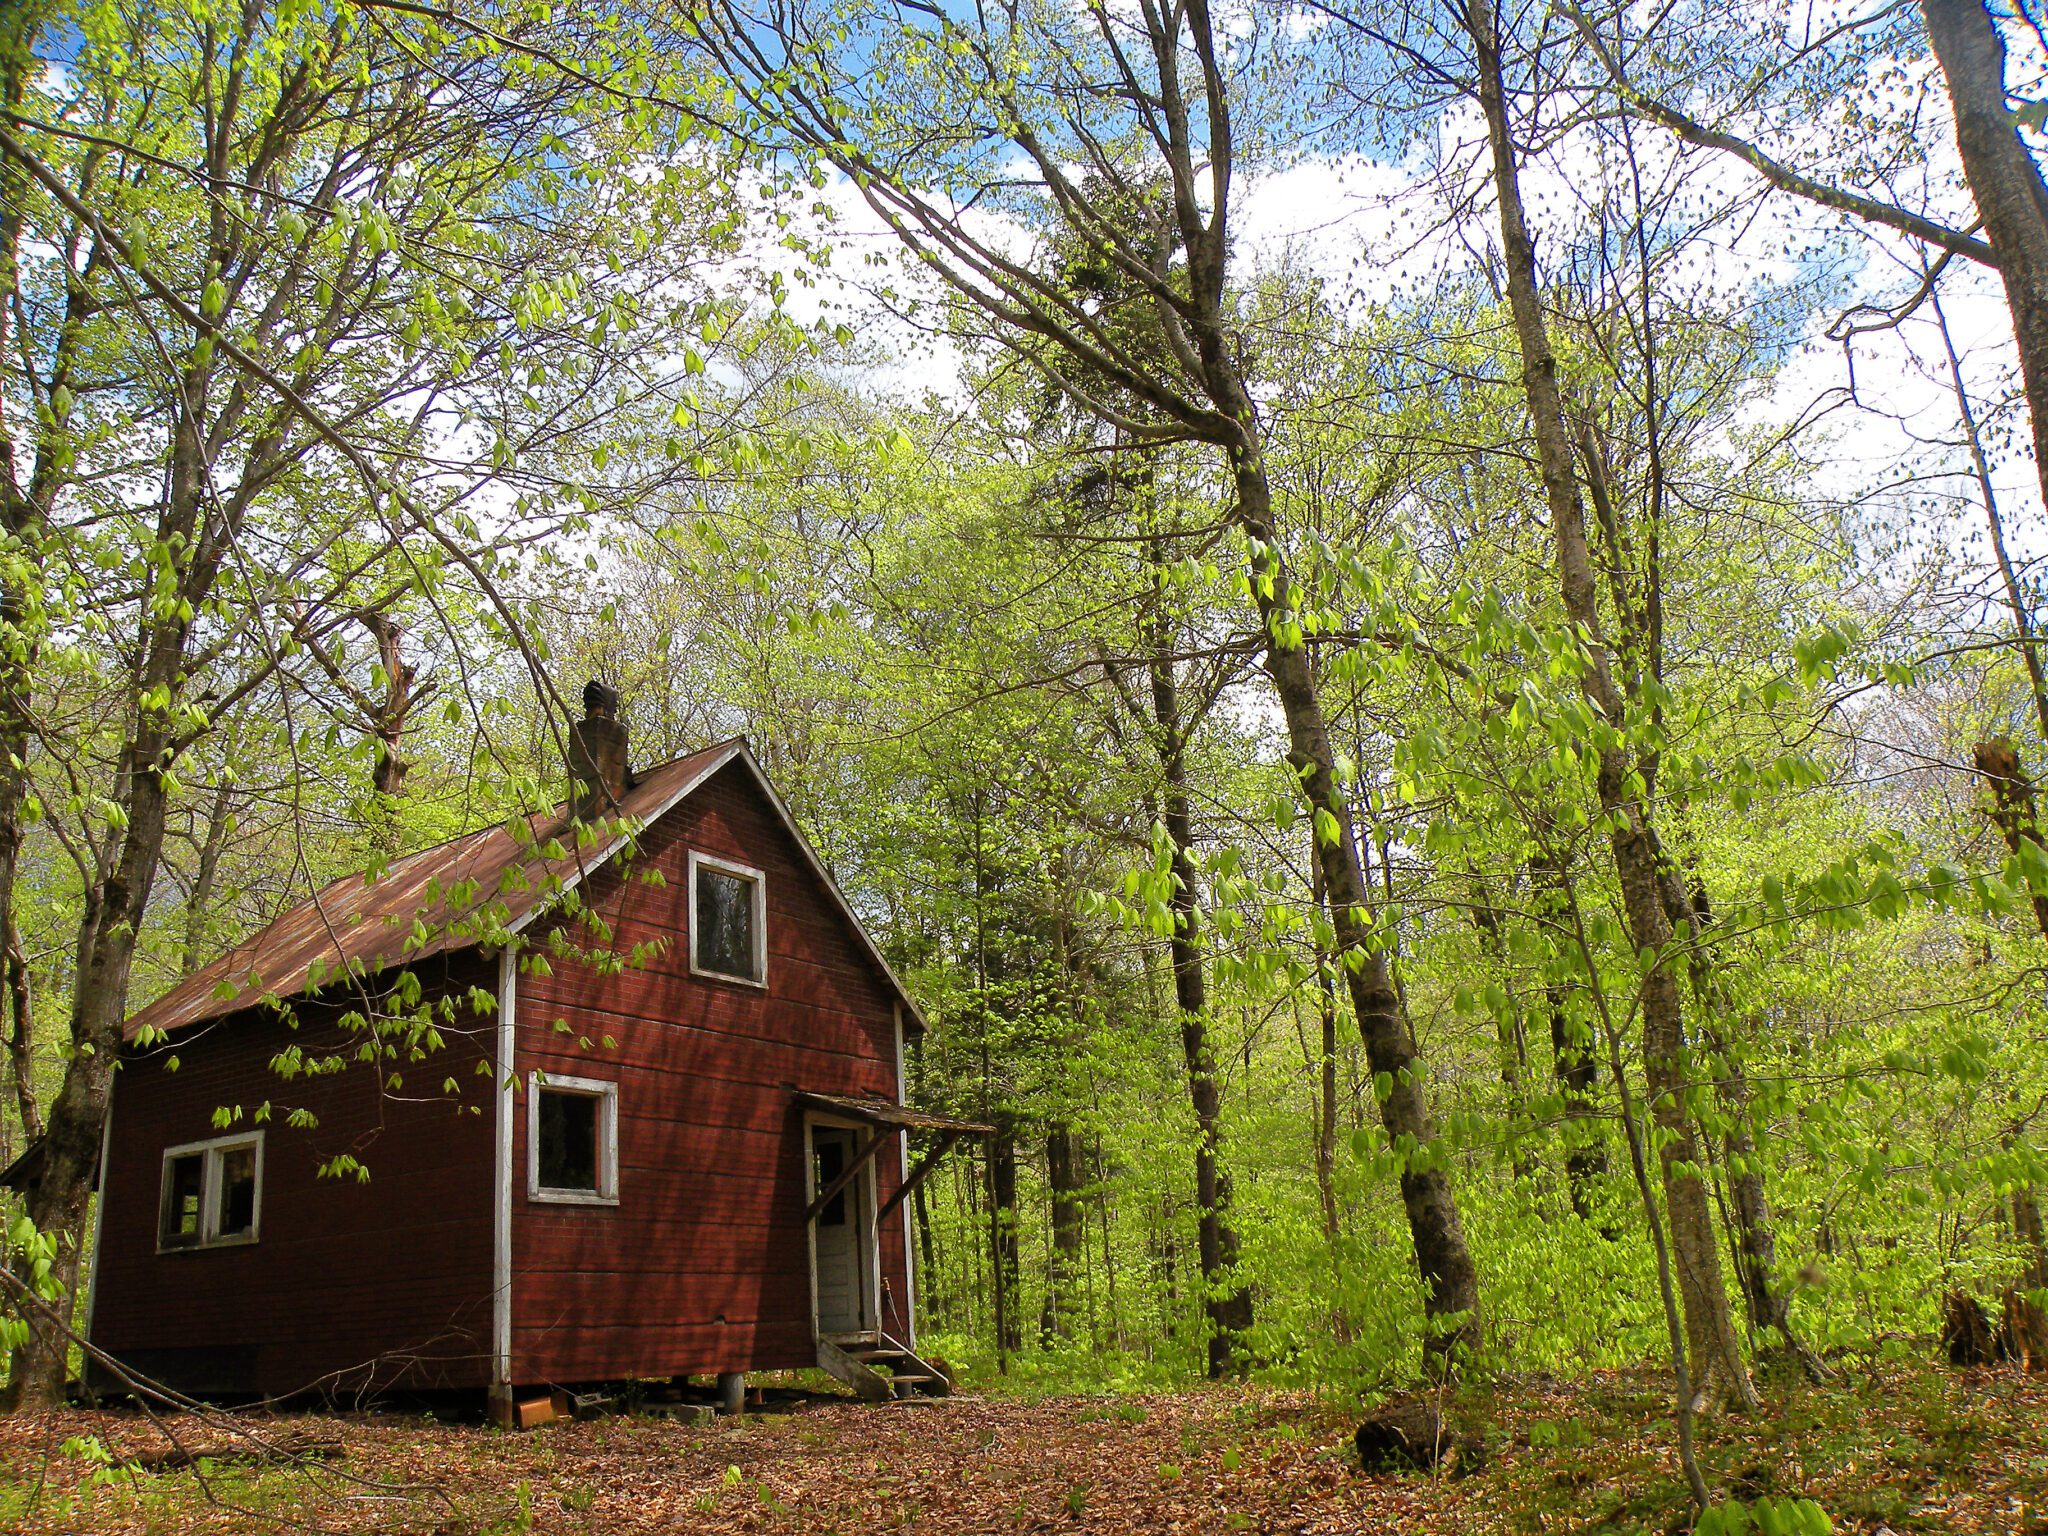 A non-conforming structure, the Hillabrandt Rod & Gun Club cabin, is seen in the Ferris Lake Wild Forest